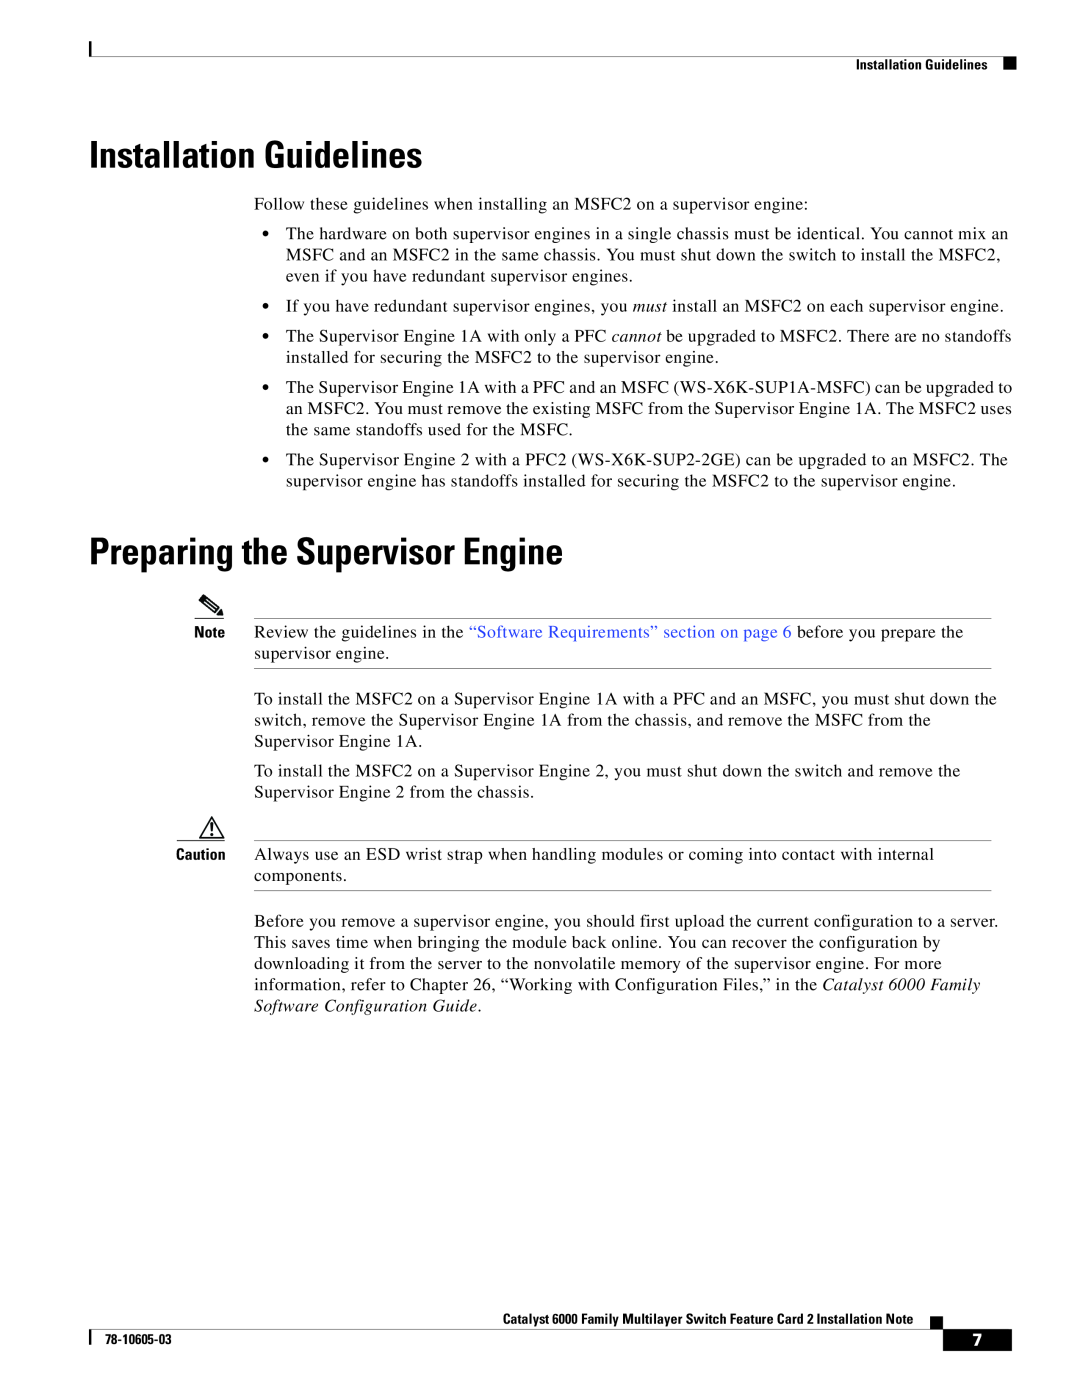 Cisco Systems WS-F6K-MSFC2 manual Installation Guidelines, Preparing the Supervisor Engine 